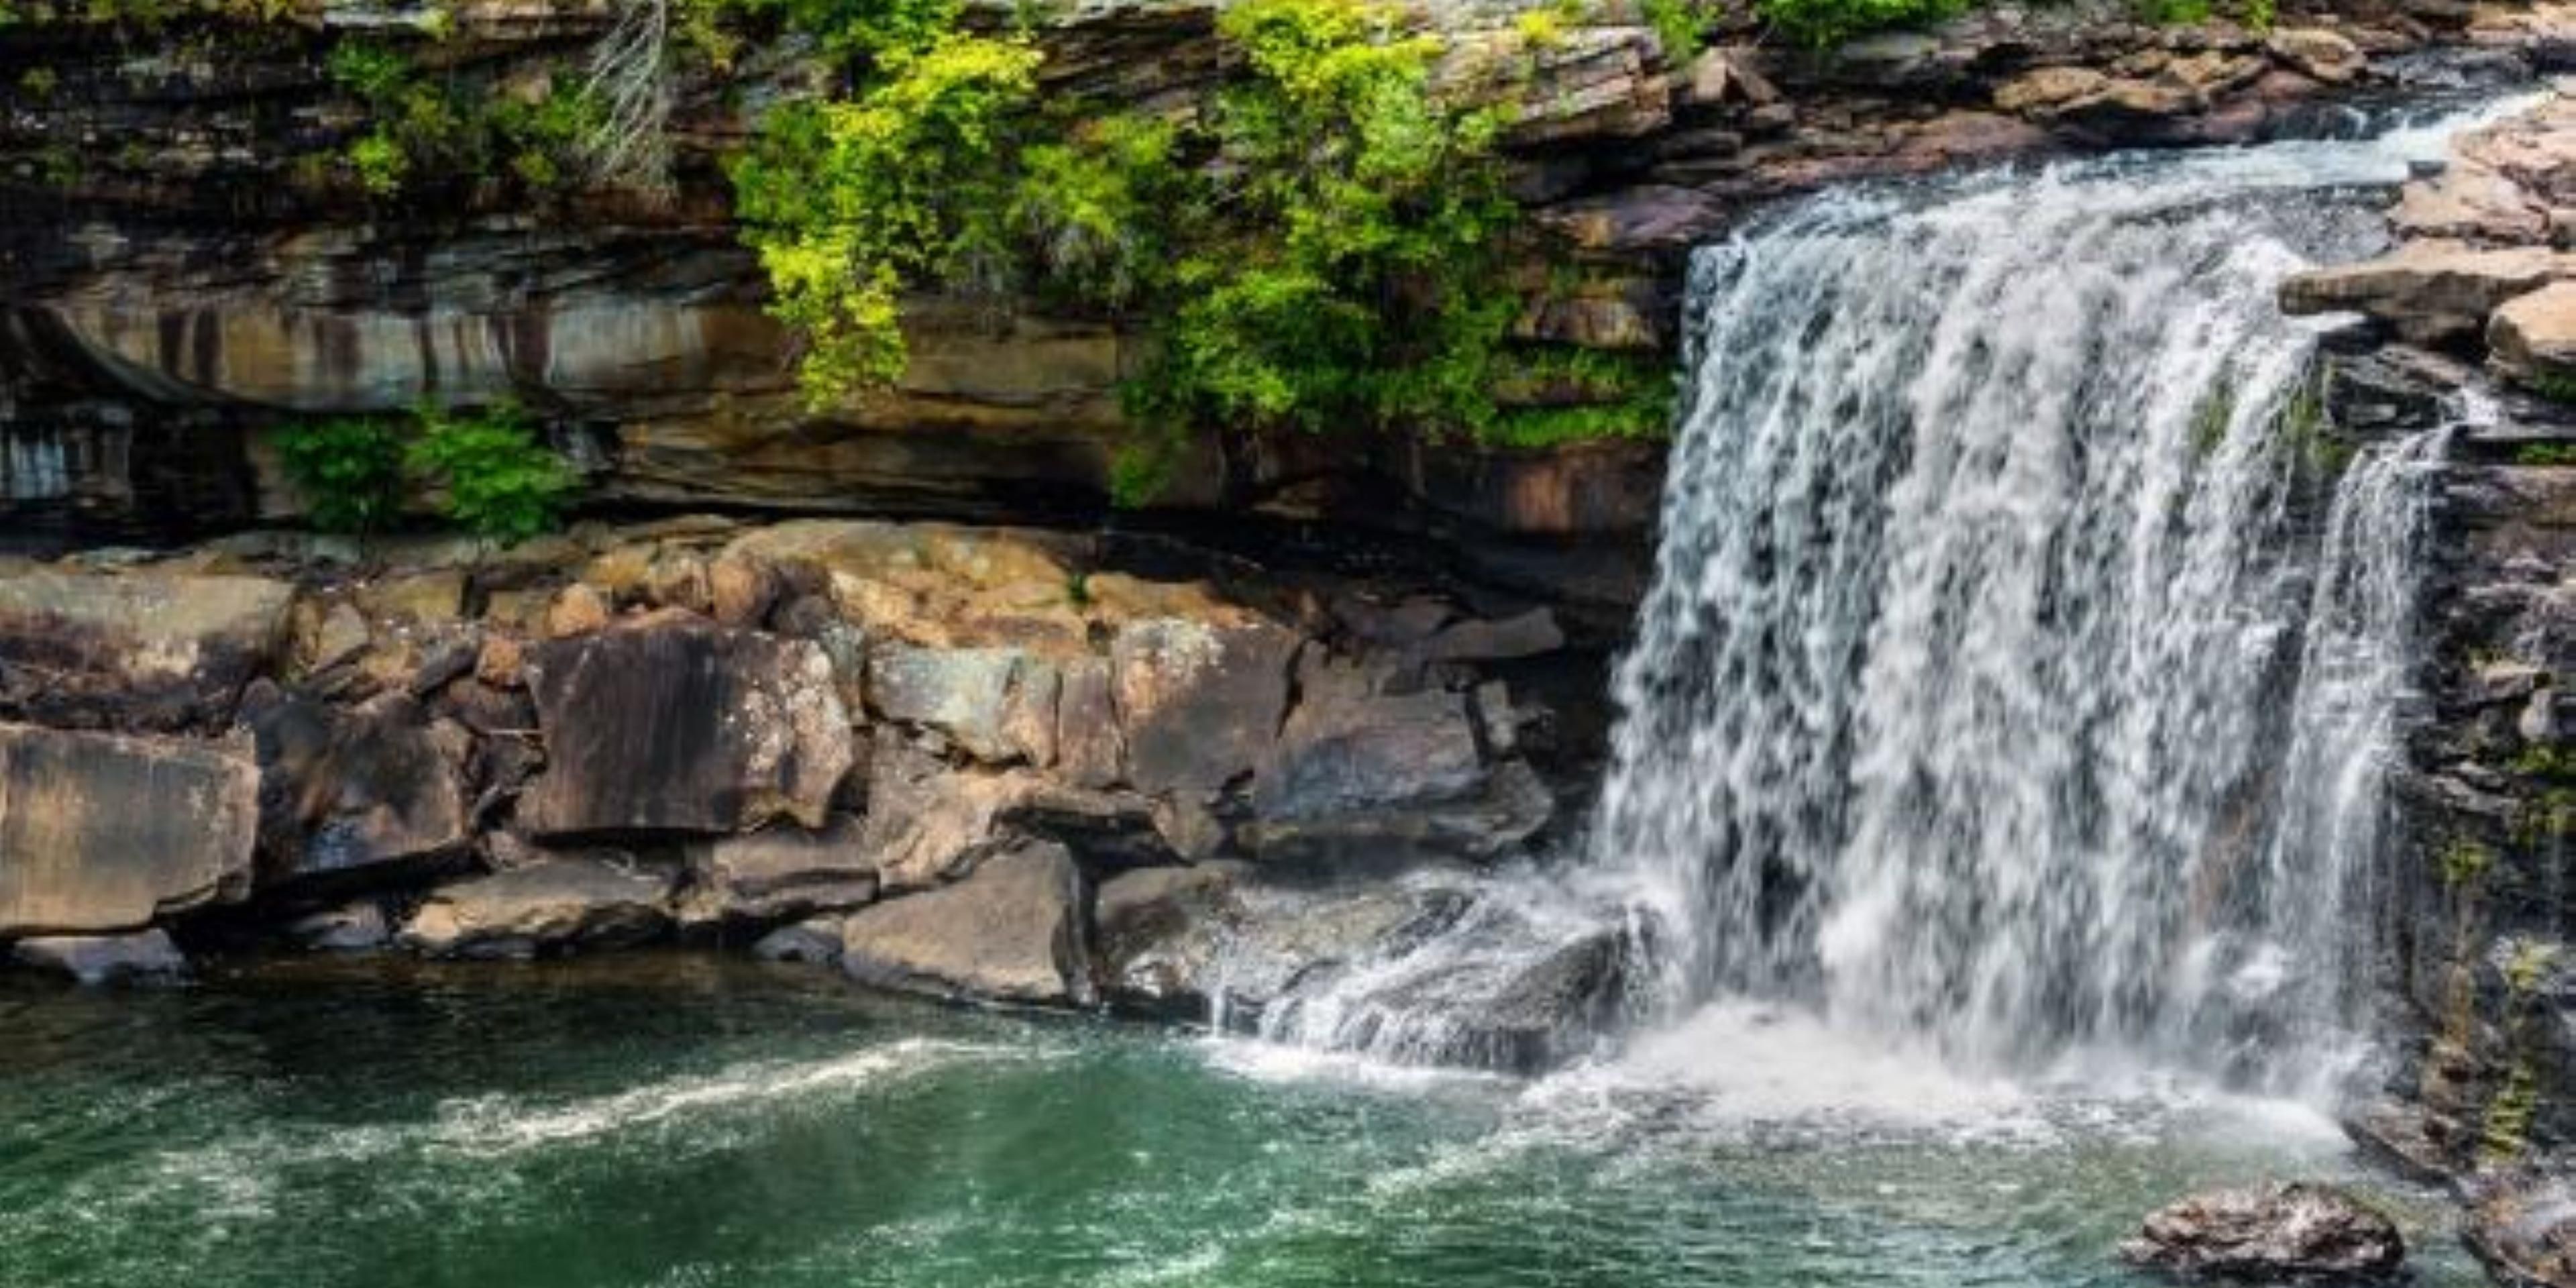 Stay with us and enjoy the close proximity to Little River Canyon National Preserve. This beautiful treasure is located on top of Lookout Mountain near Fort Payne and less than 15 miles from hotel. Enjoy back country exploring, scenic drives, and spectacular views.  